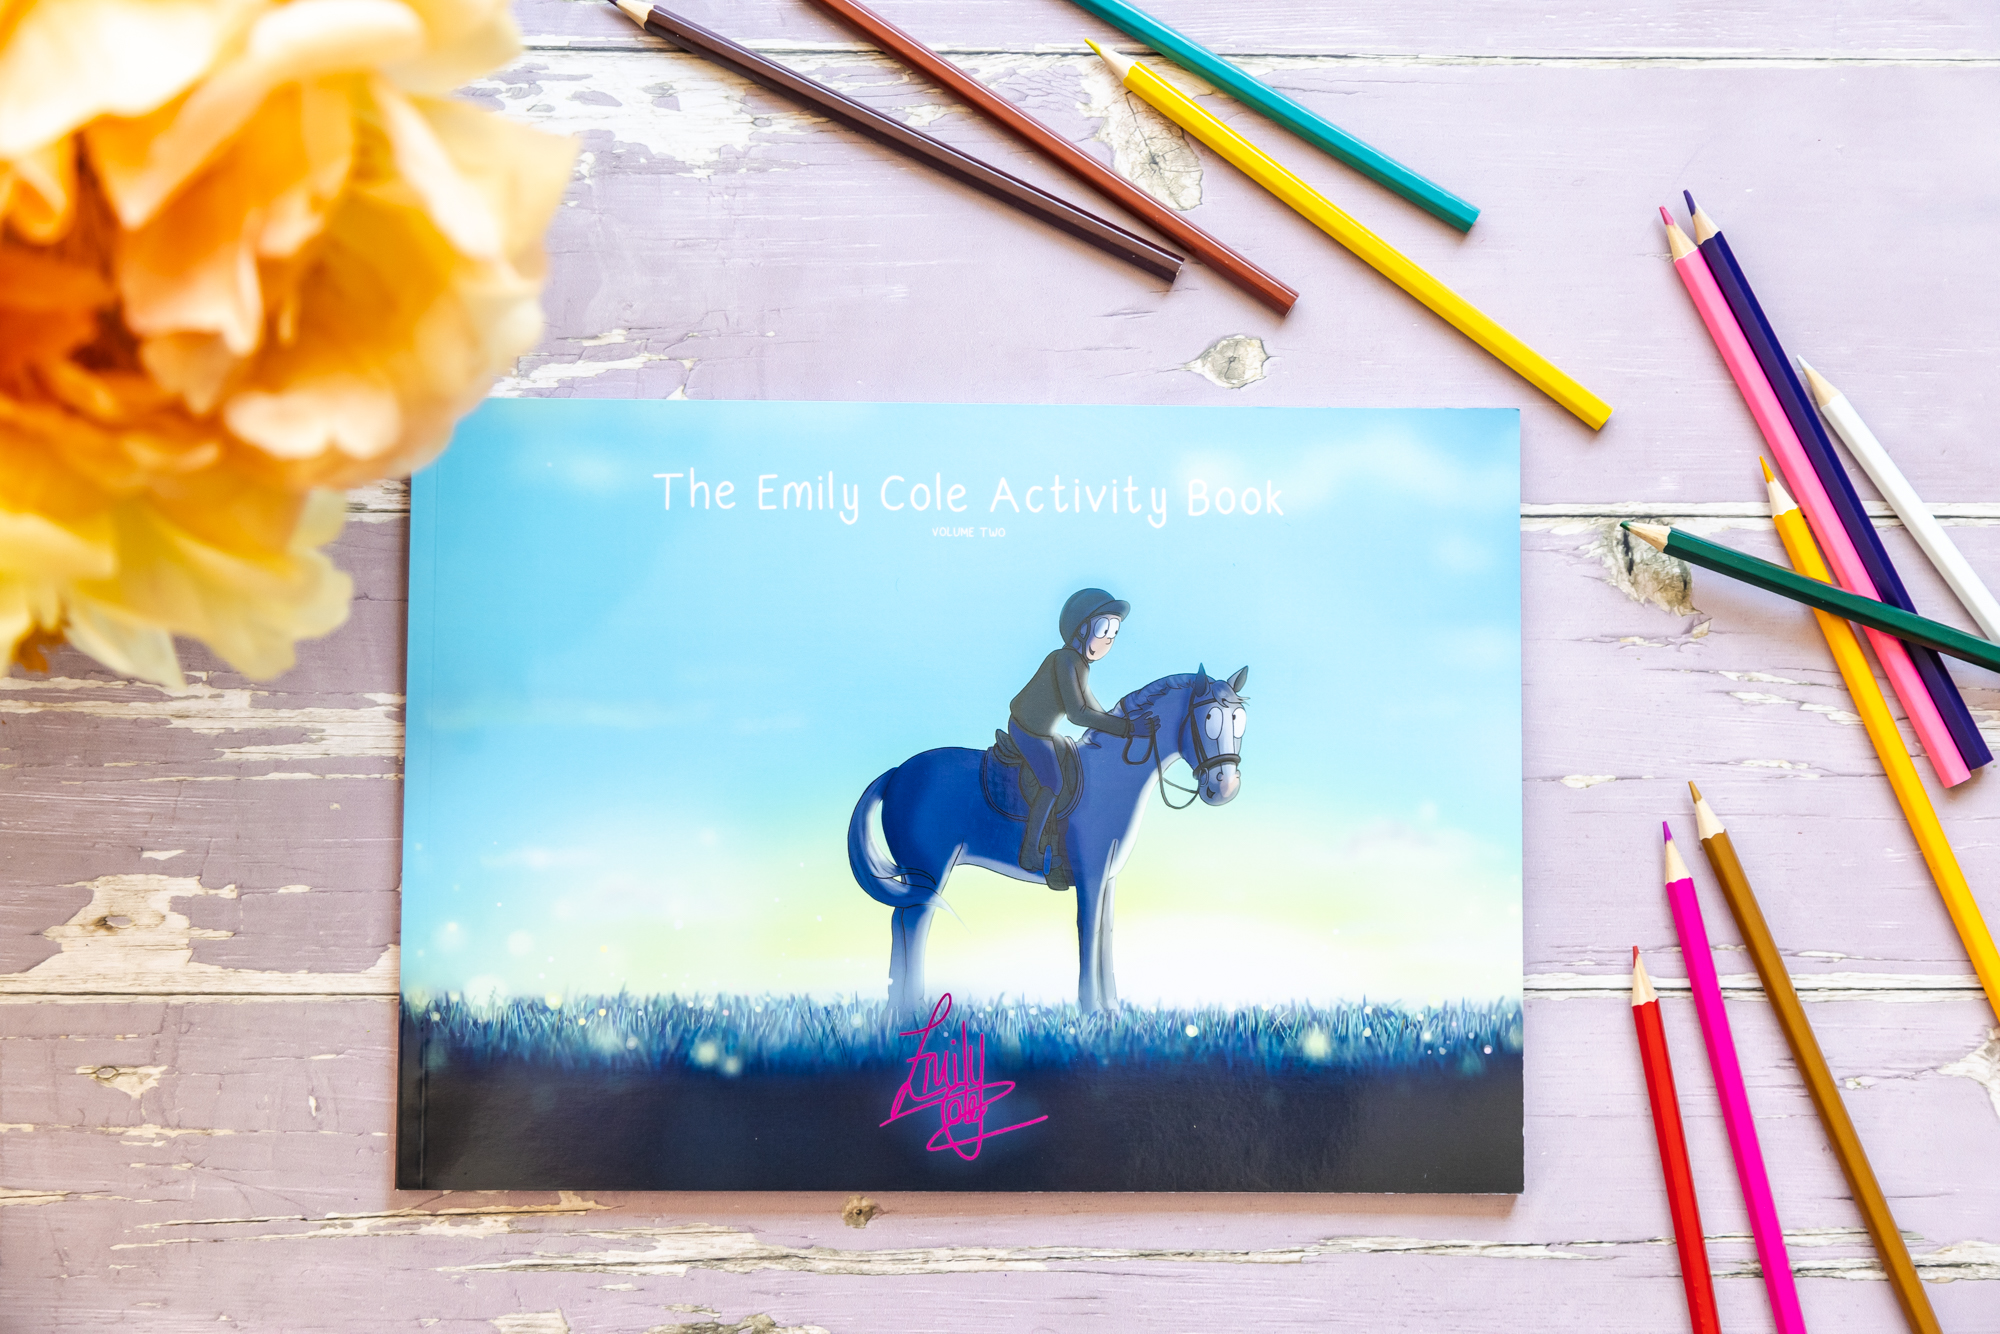 The Emily Cole Activity Book volume 2 surrounded by coloured pencils and an orange flower